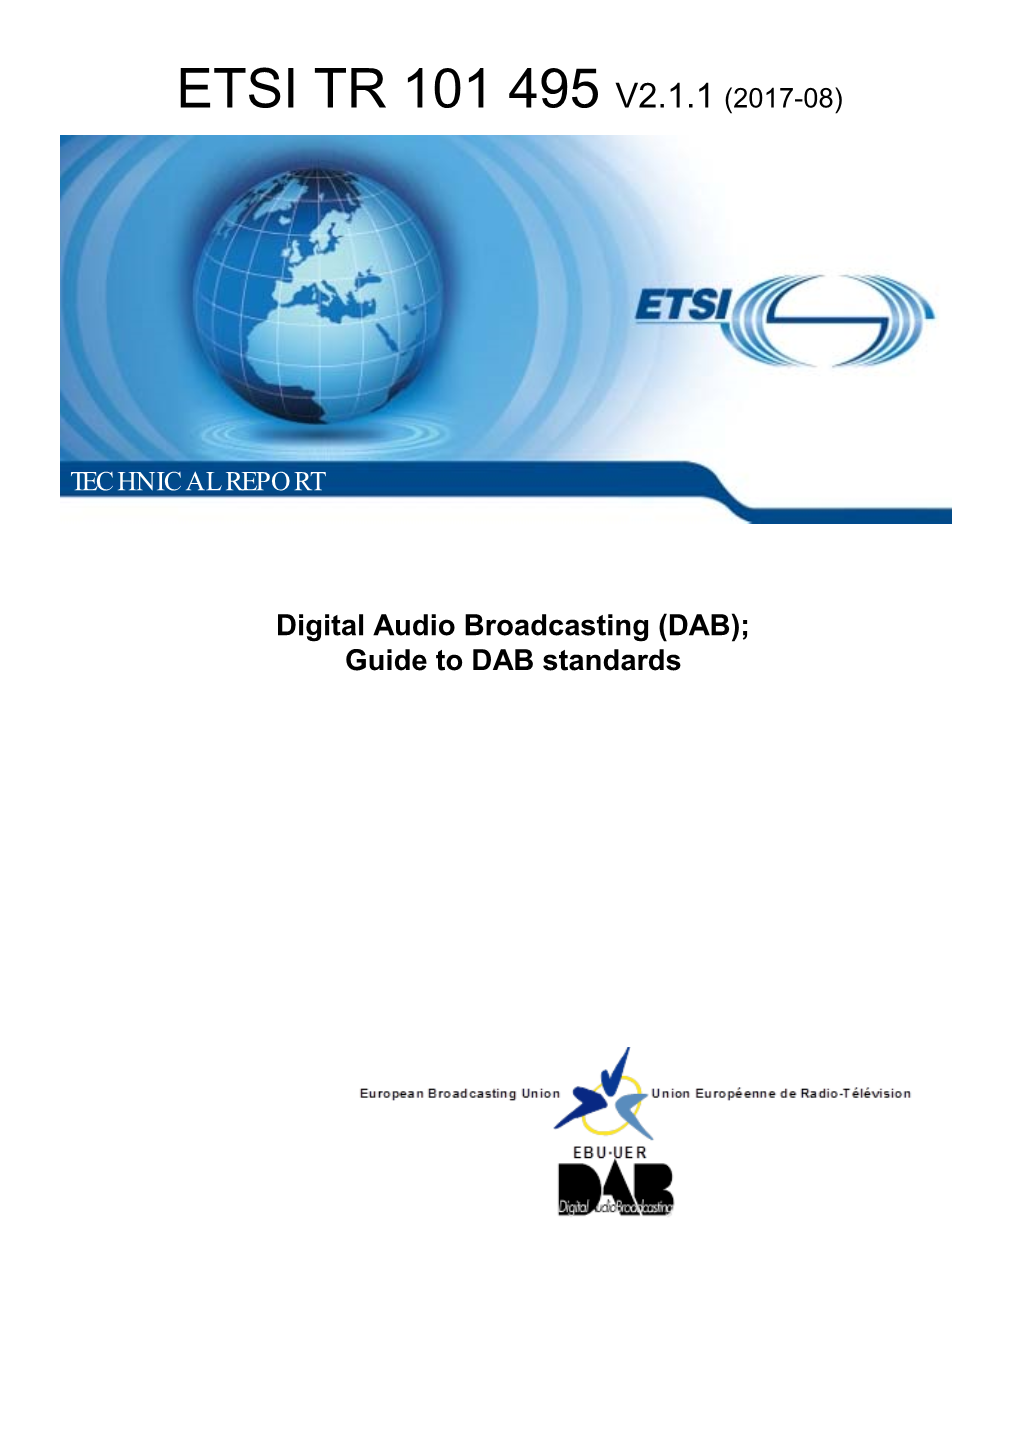 Digital Audio Broadcasting (DAB); Guide to DAB Standards